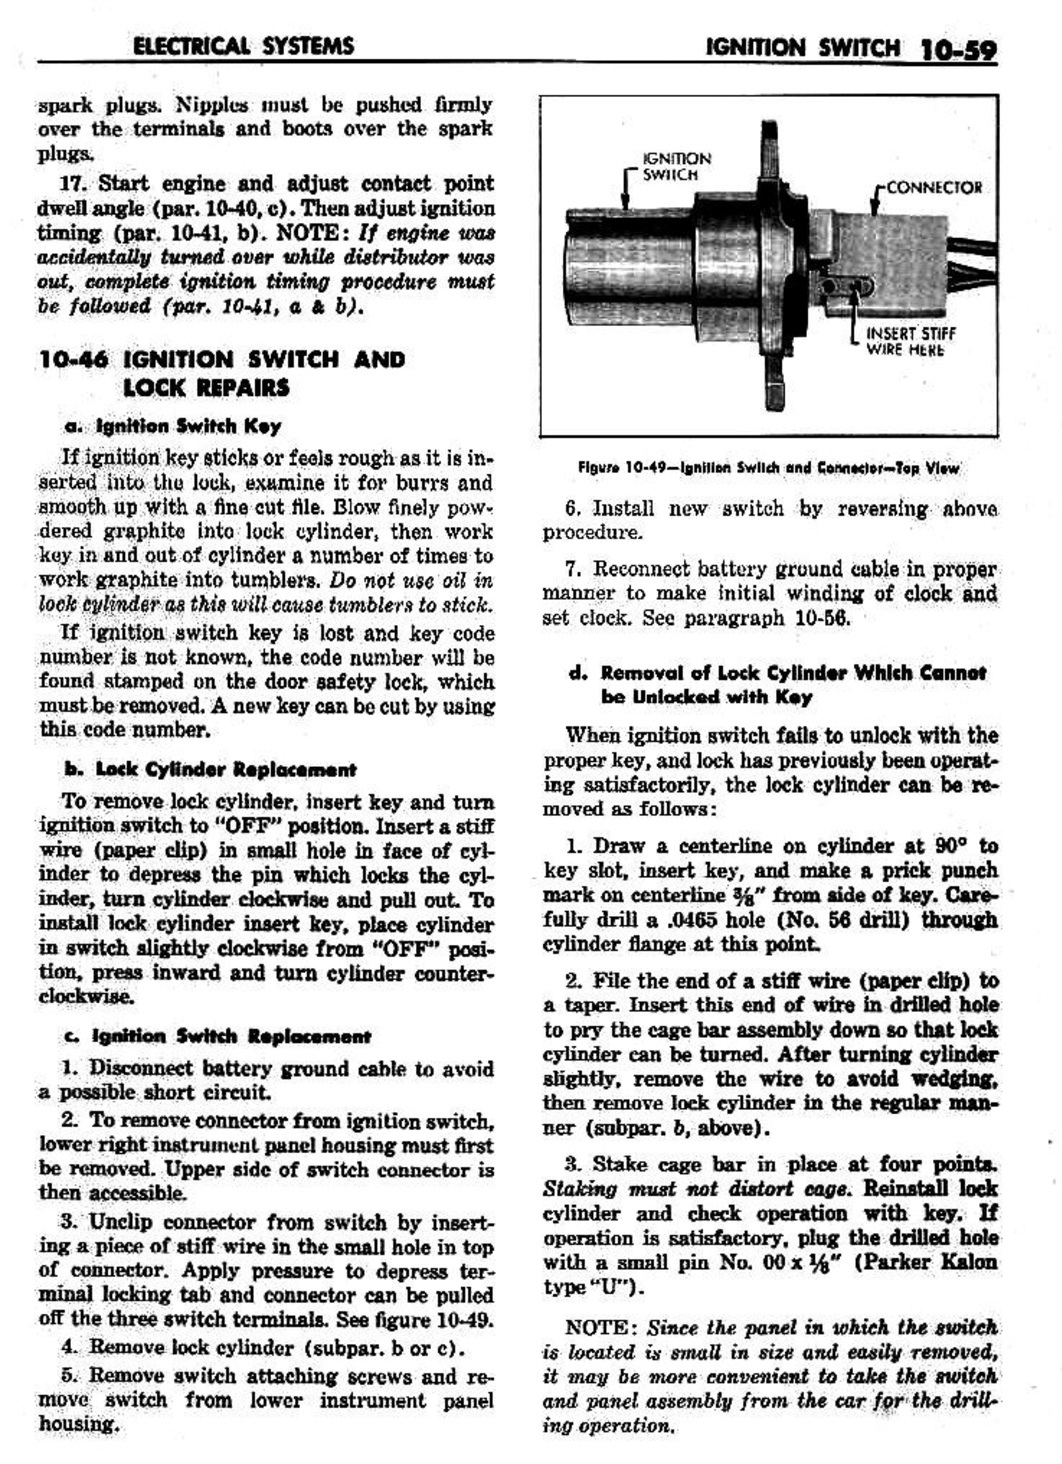 n_11 1959 Buick Shop Manual - Electrical Systems-059-059.jpg